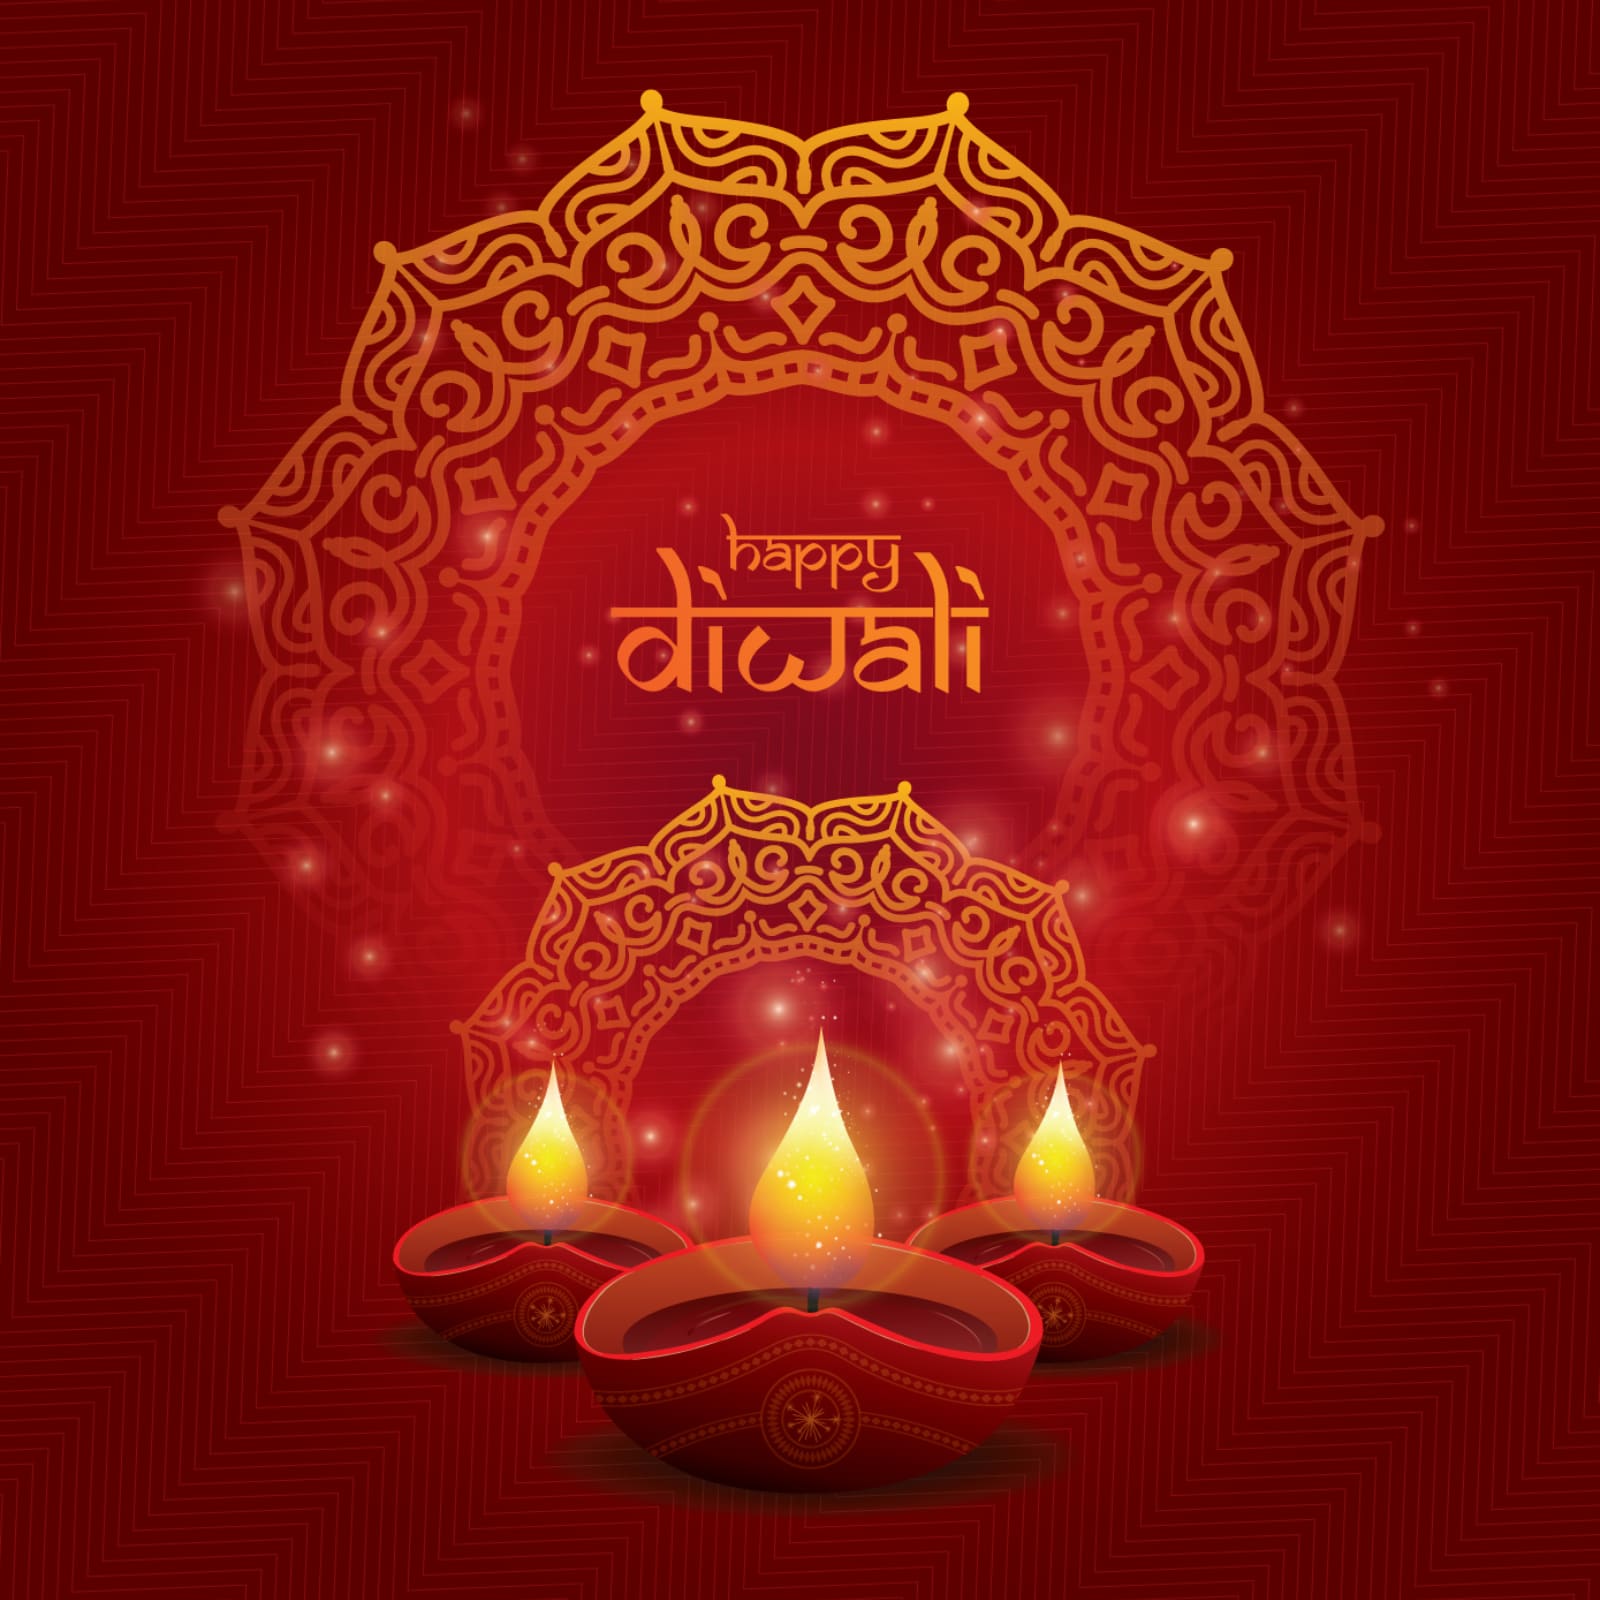 Happy Diwali 2021: Wishes, Images, Status, Quotes, Messages and WhatsApp  Greetings to Share on Deepavali